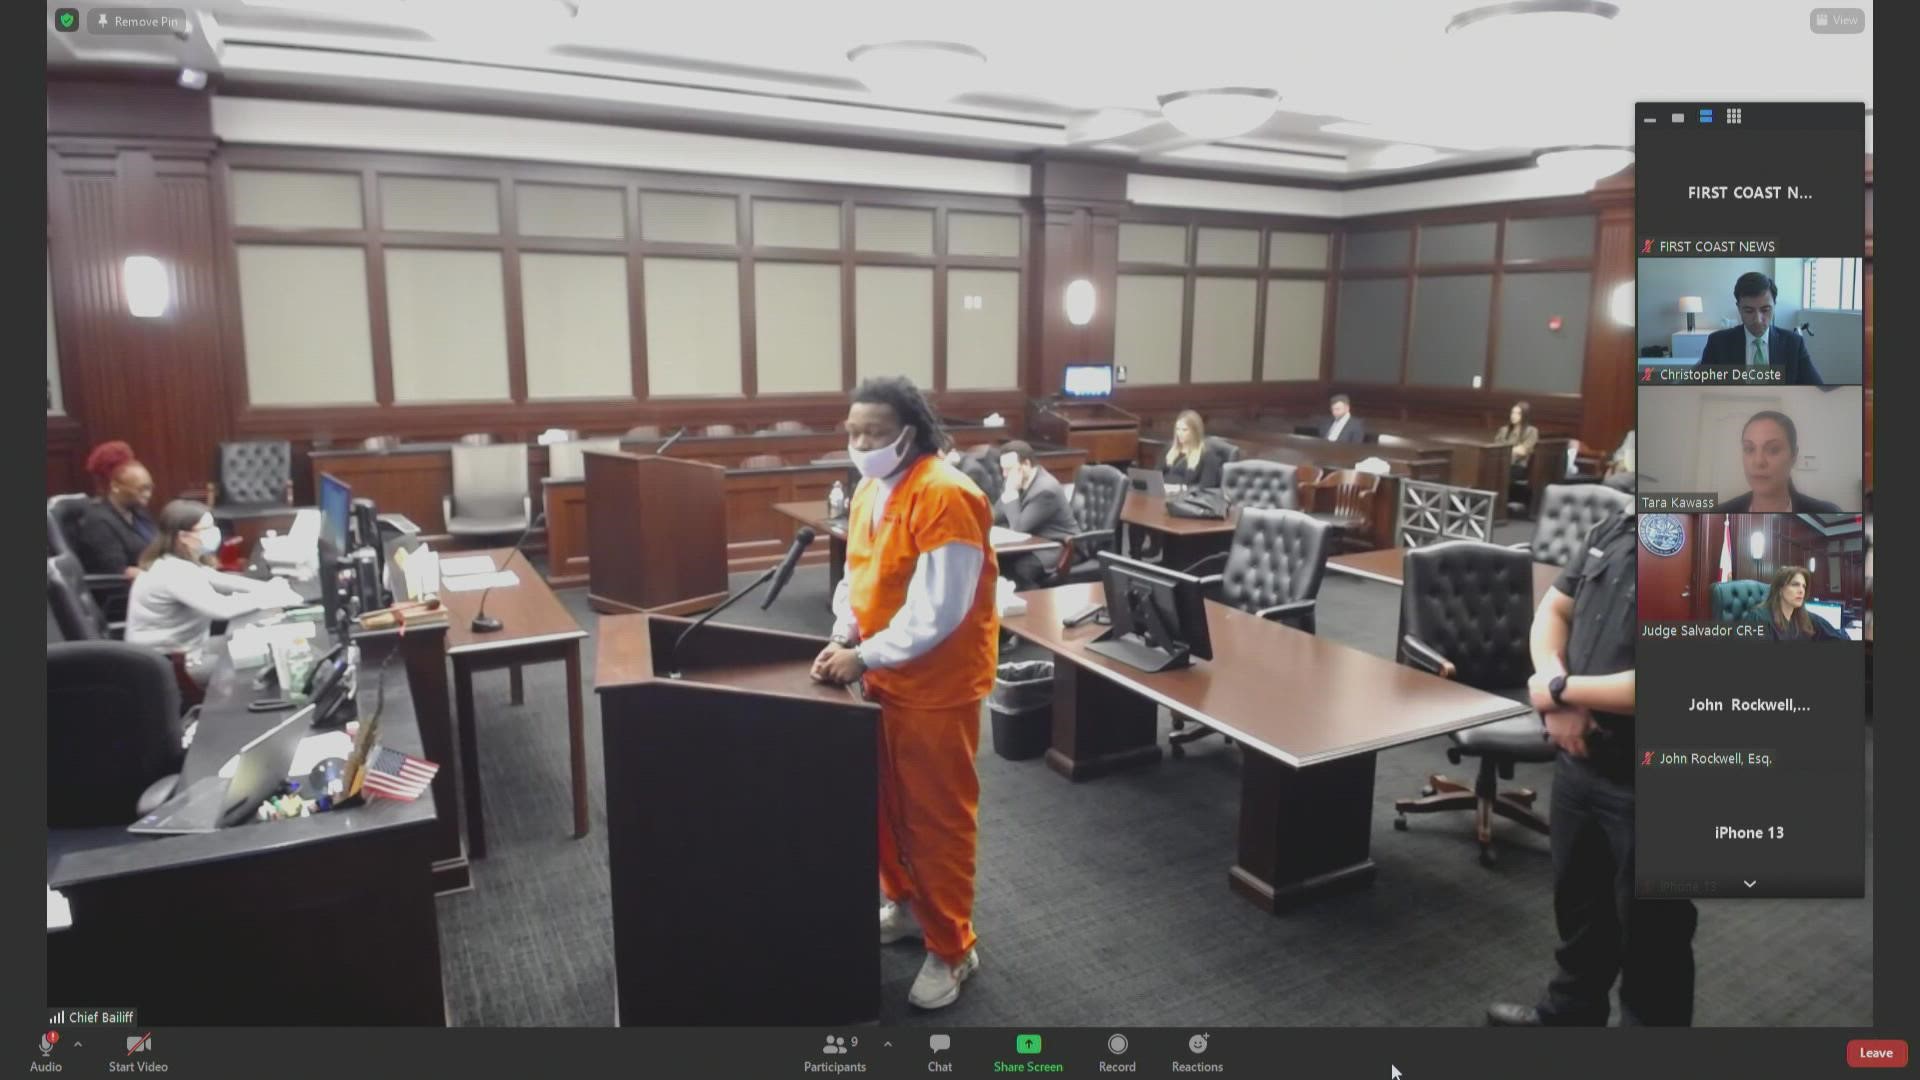 A judge heard arguments Friday during a hearing to lower accused killer Hakeem Robinson's (Ksoo's) bond. A decision is expected in the coming weeks.